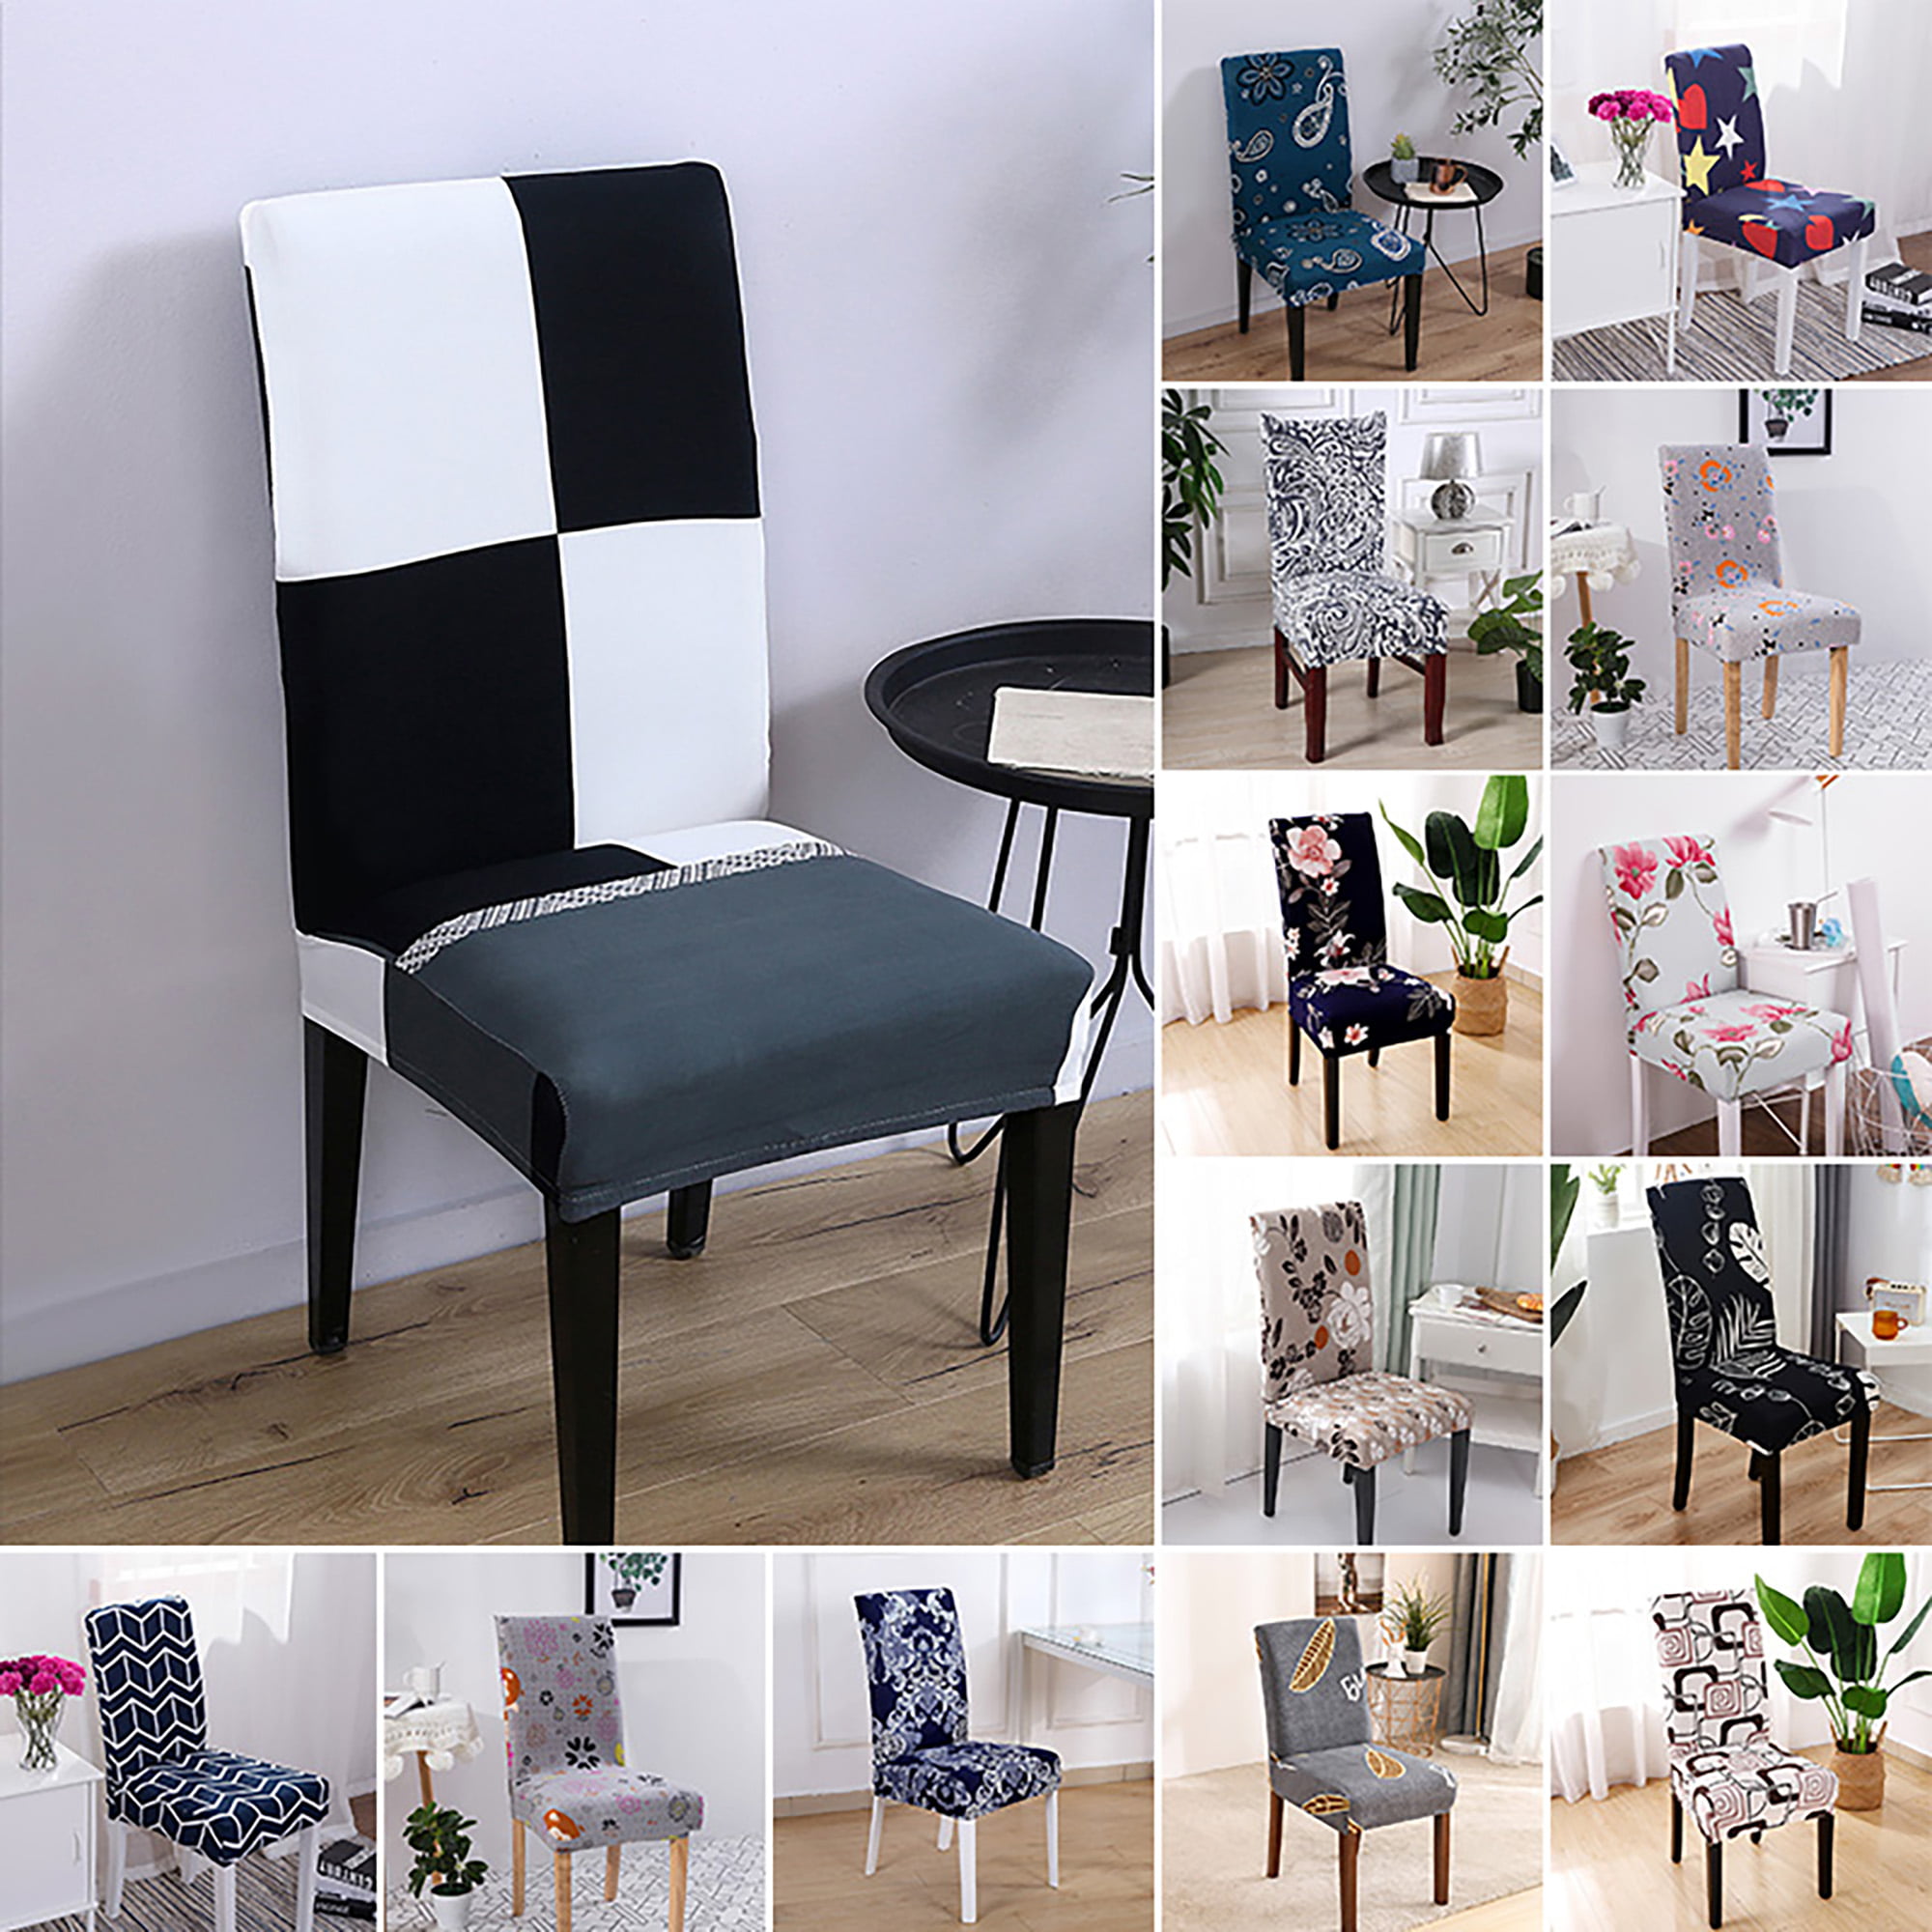 Details about   1-6Pcs Elastic Stretch Chair Covers Slipcover Seat Cover Dining Banquet Decor 